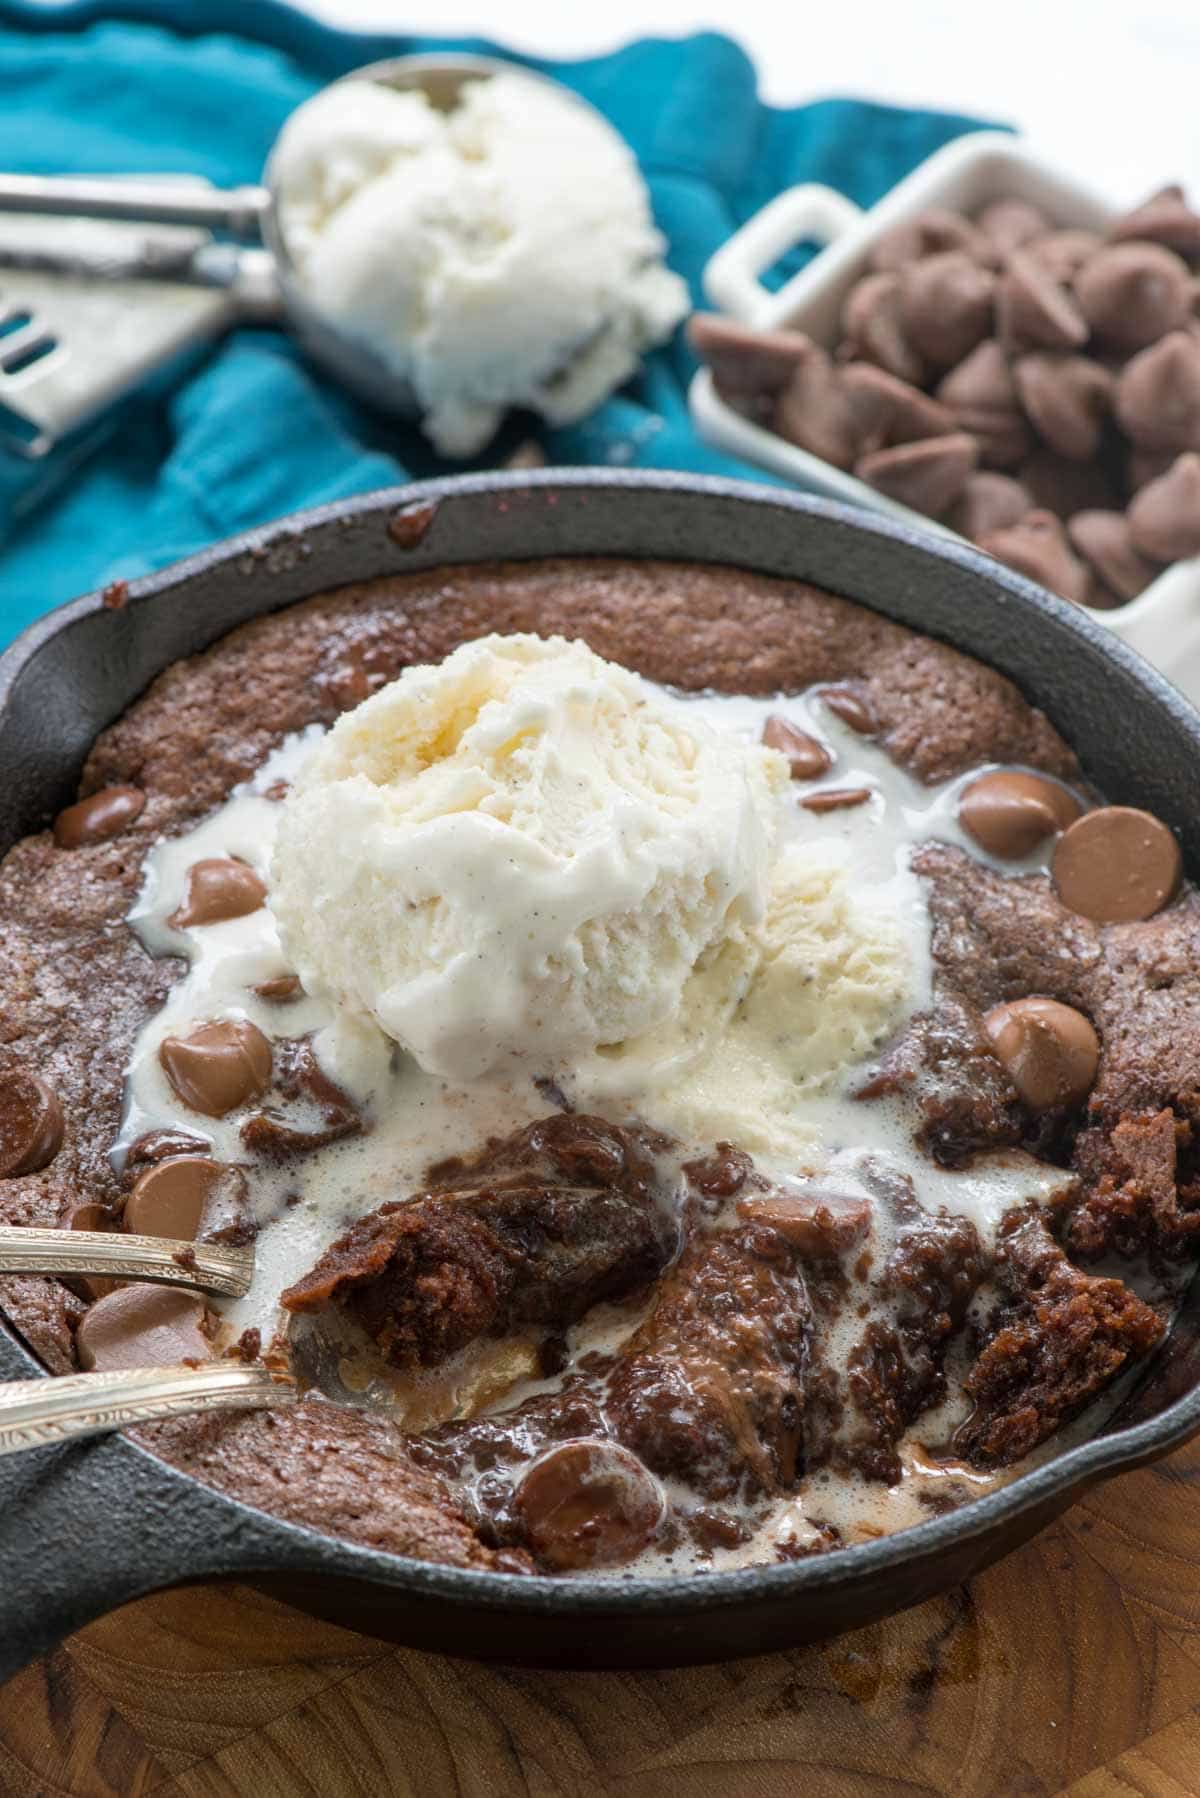 Small Batch Skillet Brownie for two - this easy one bowl brownie recipe makes a small batch for two! It's gooey and rich and my FAVORITE brownie recipe!